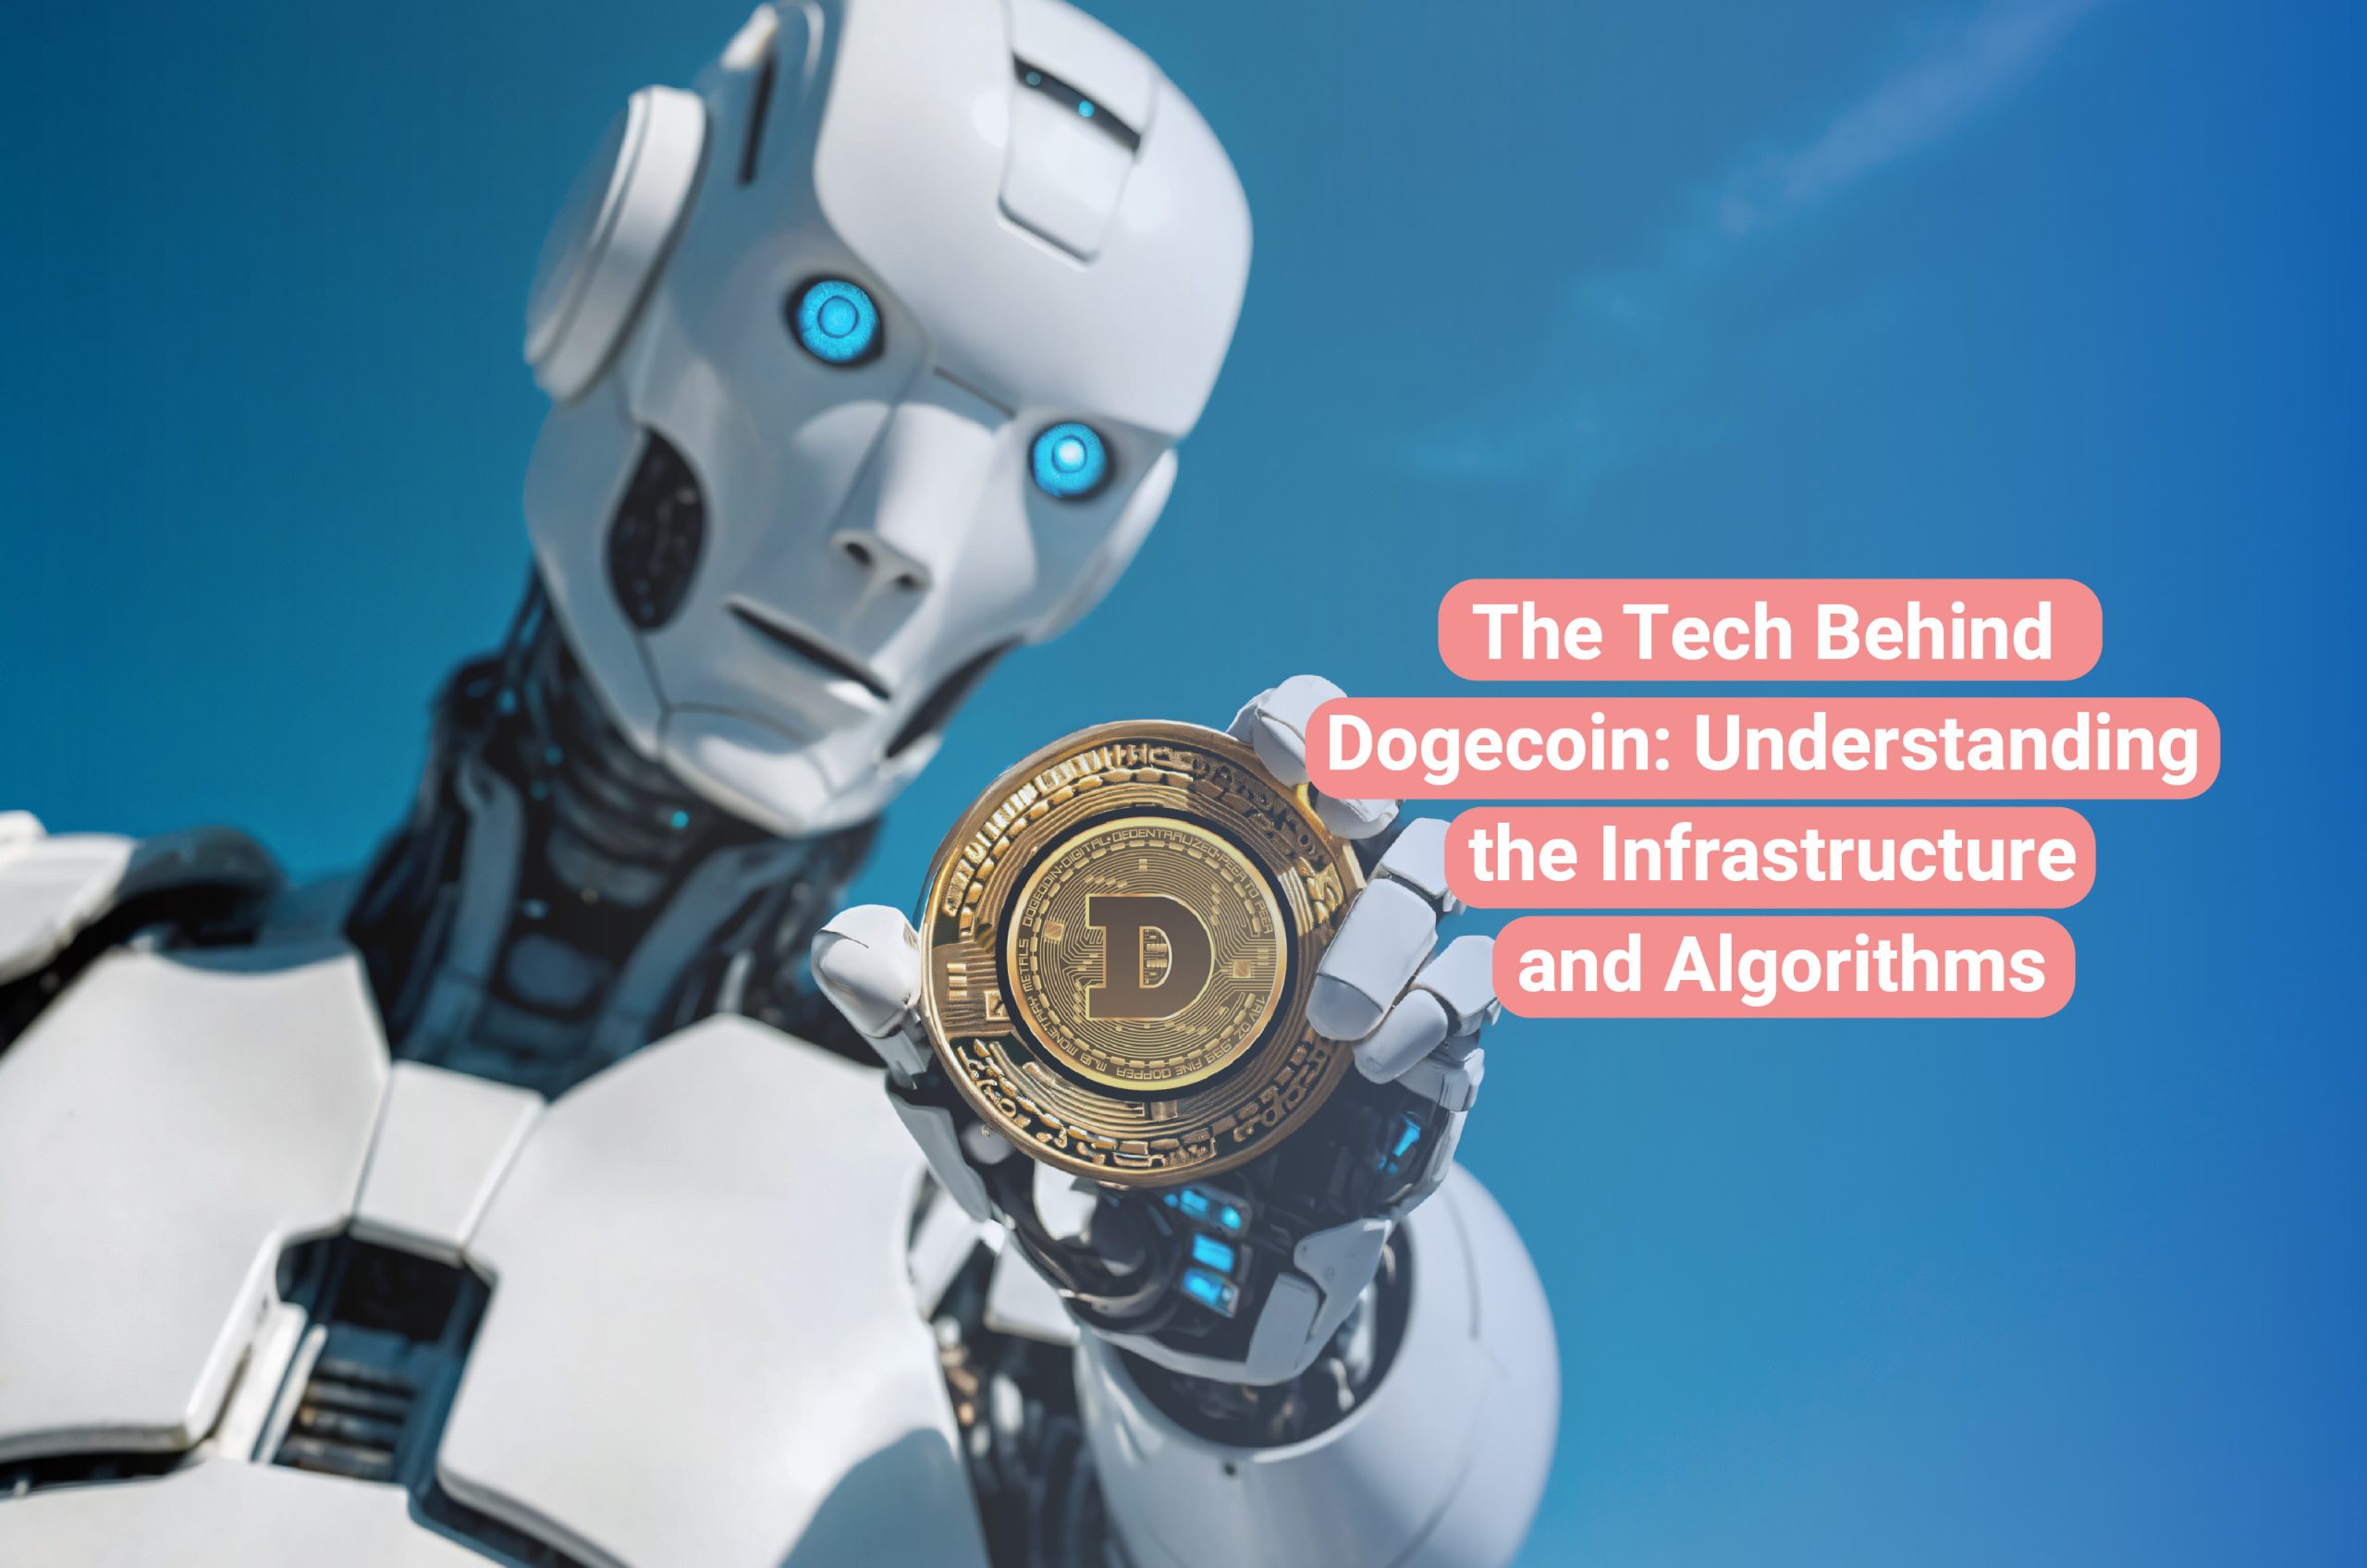 The Tech Behind Dogecoin: Understanding the Infrastructure and Algorithms